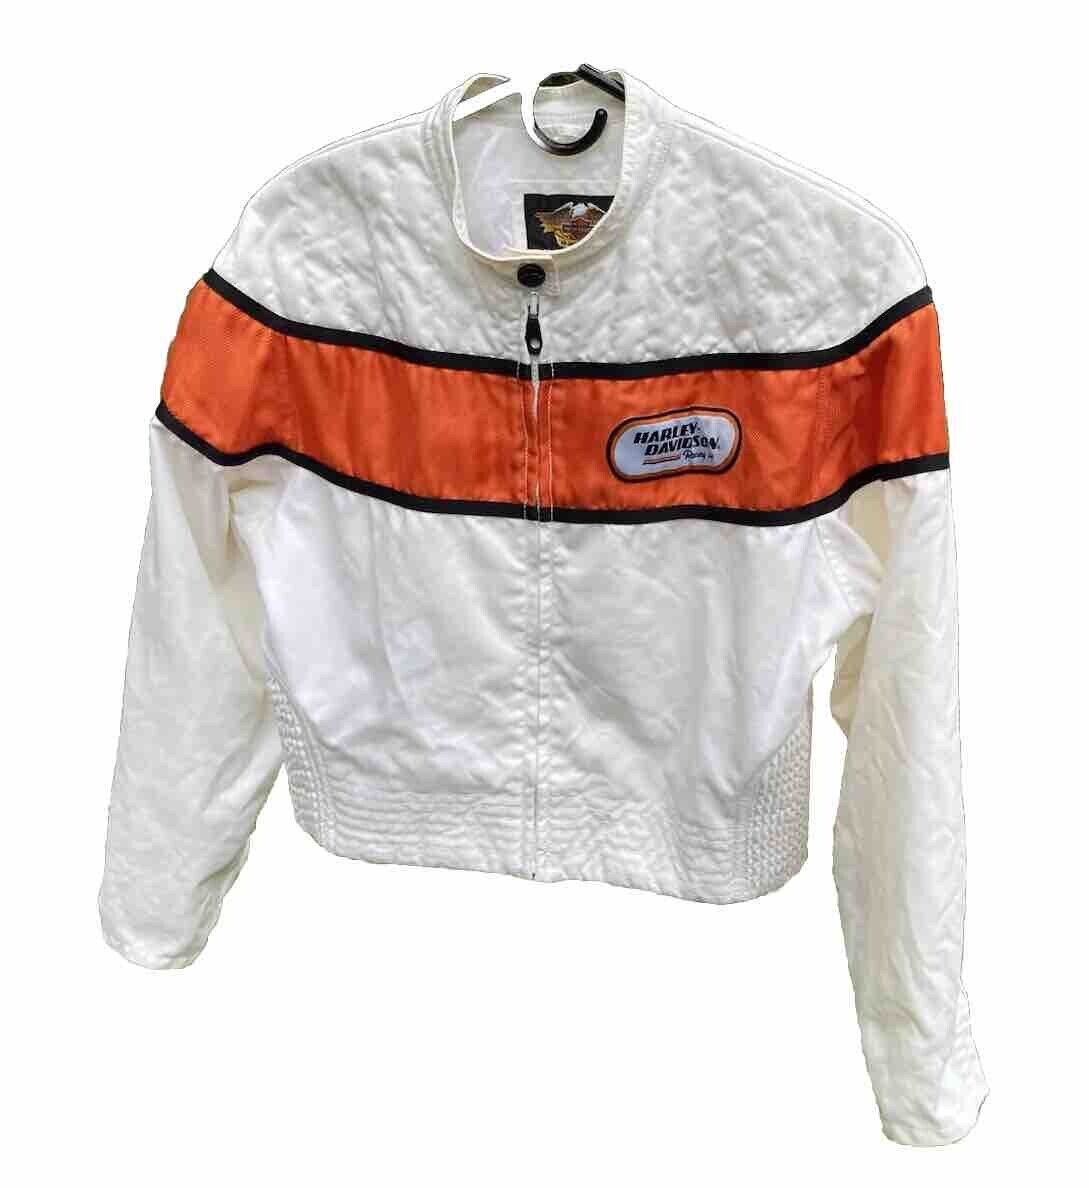 Vintage Harley Davidson racing jacket  Amazing quality and condition M Womens